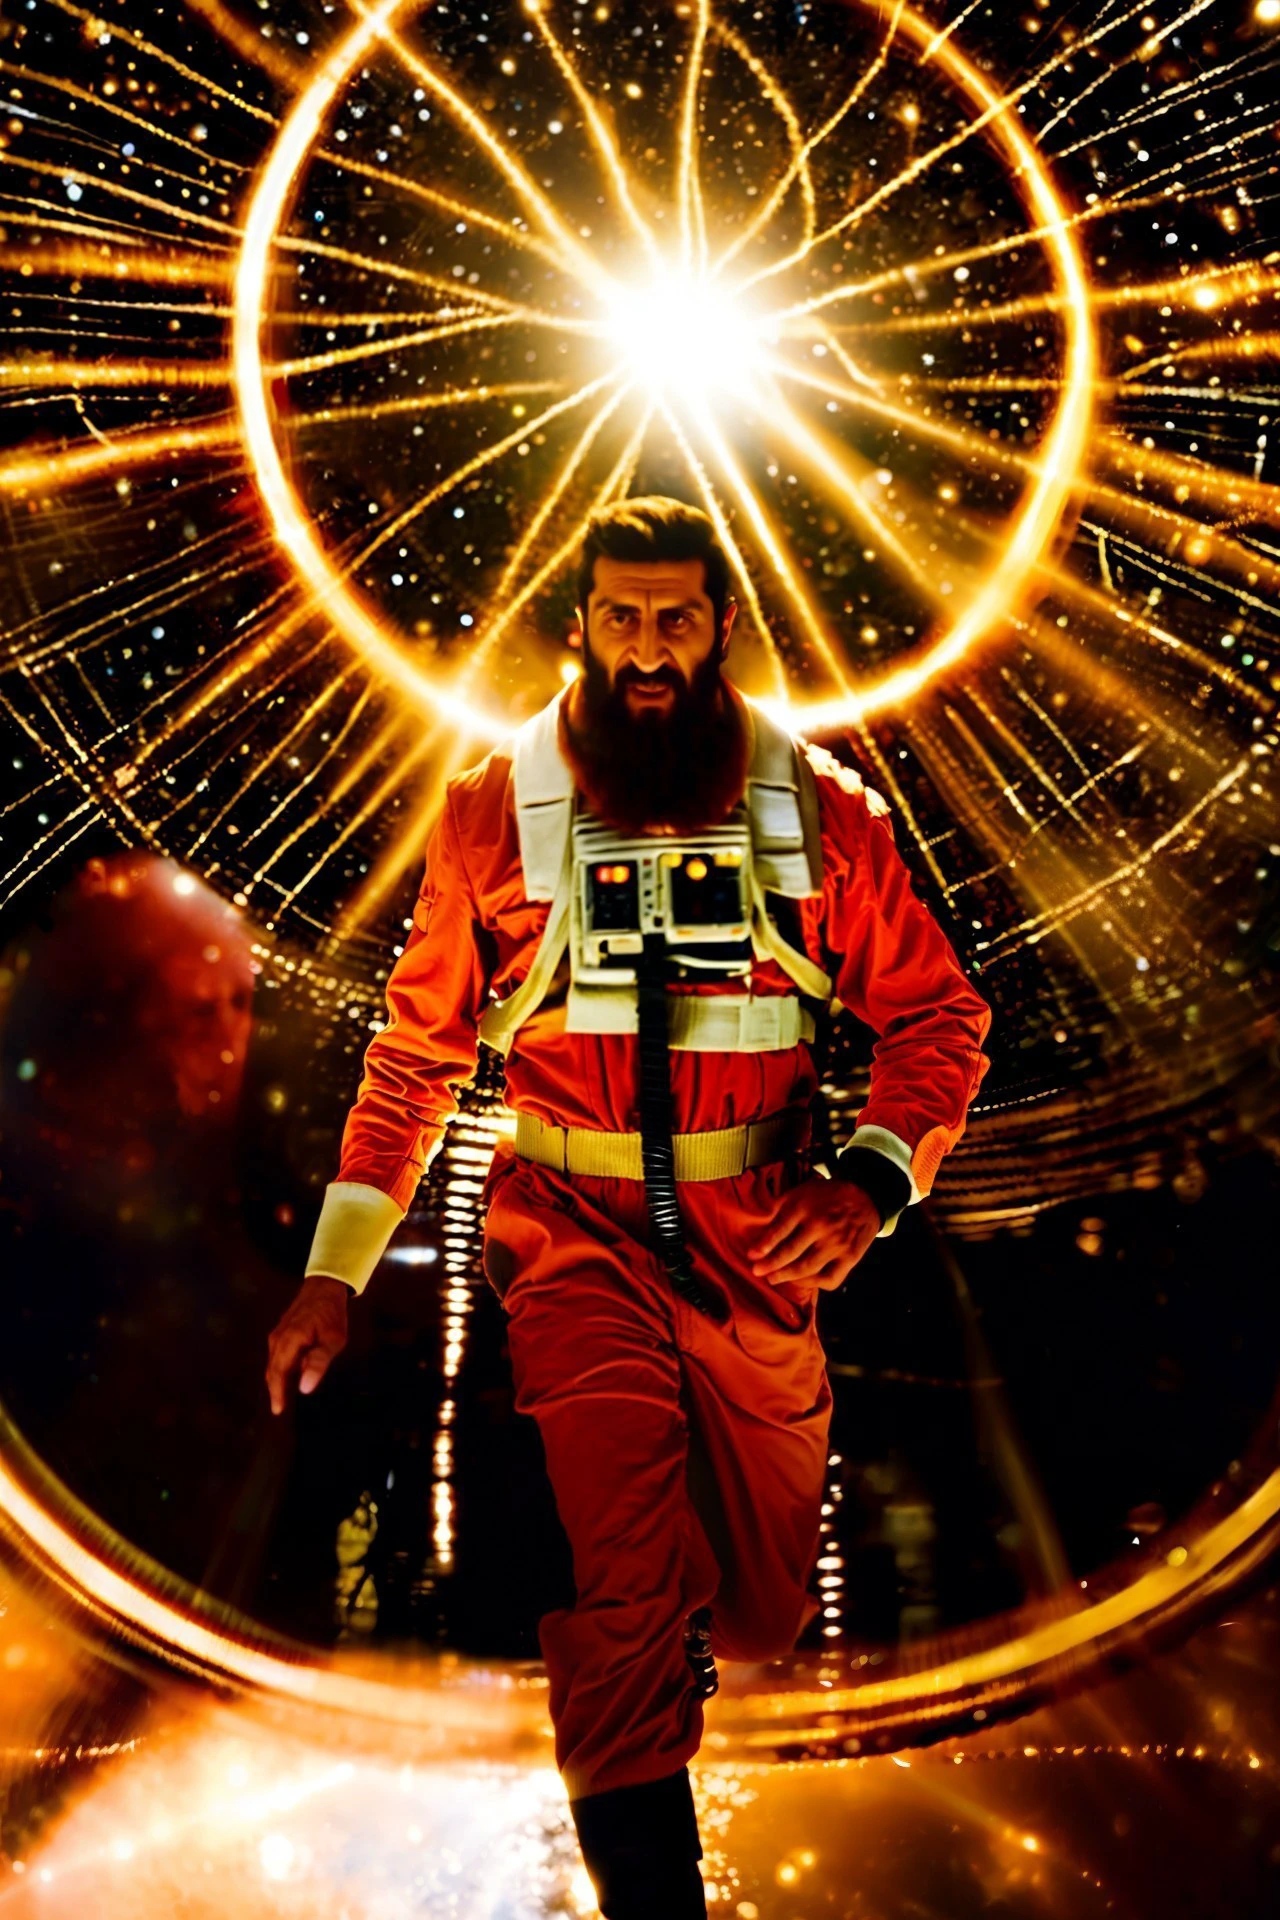 (Fares Fares:1.2) man with a (slicked-back hair:1.3) wearing a rebel pilot suit, inside a cockpit with one big wide panel (curved oval windows:1.2) showing the dark space, bright stars, (full:1.2) (long squarish:1.2) big (beard:1.2), devilish (confident looking down:1.2), (a circle of  golden magic filament thread of light:1.3) is around his body, 4k uhd, dslr, soft light, high quality, Fujifilm XT3  